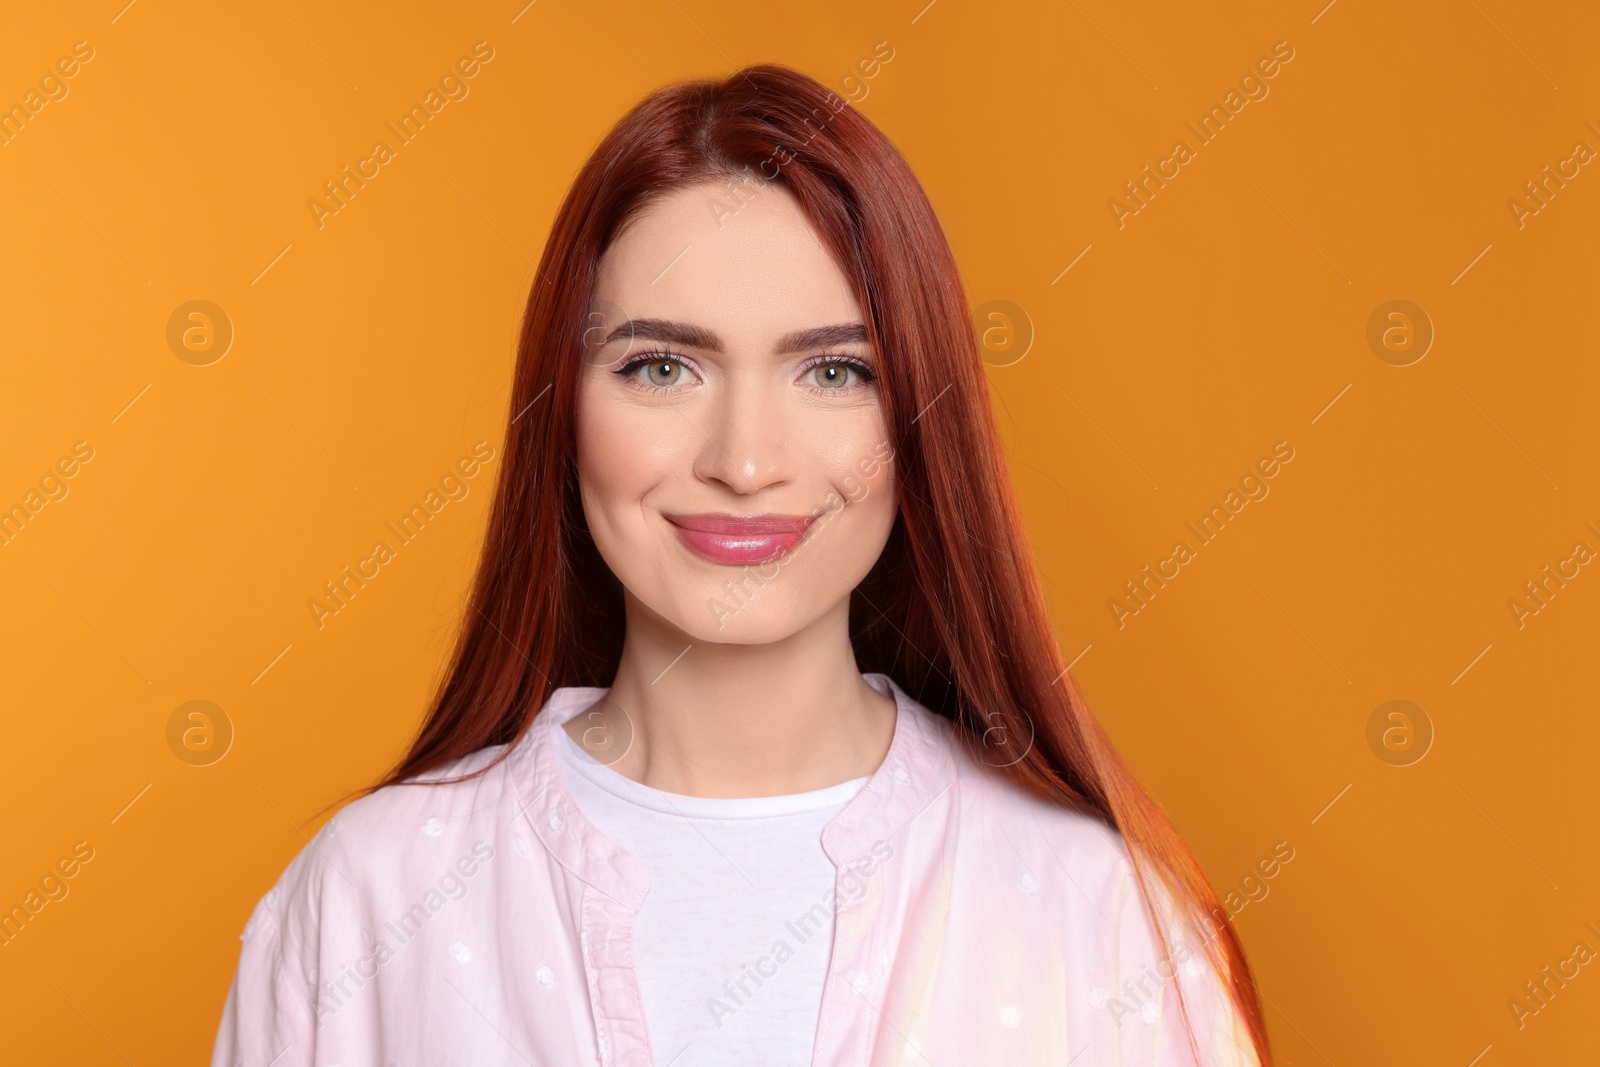 Photo of Beautiful woman with red dyed hair on orange background